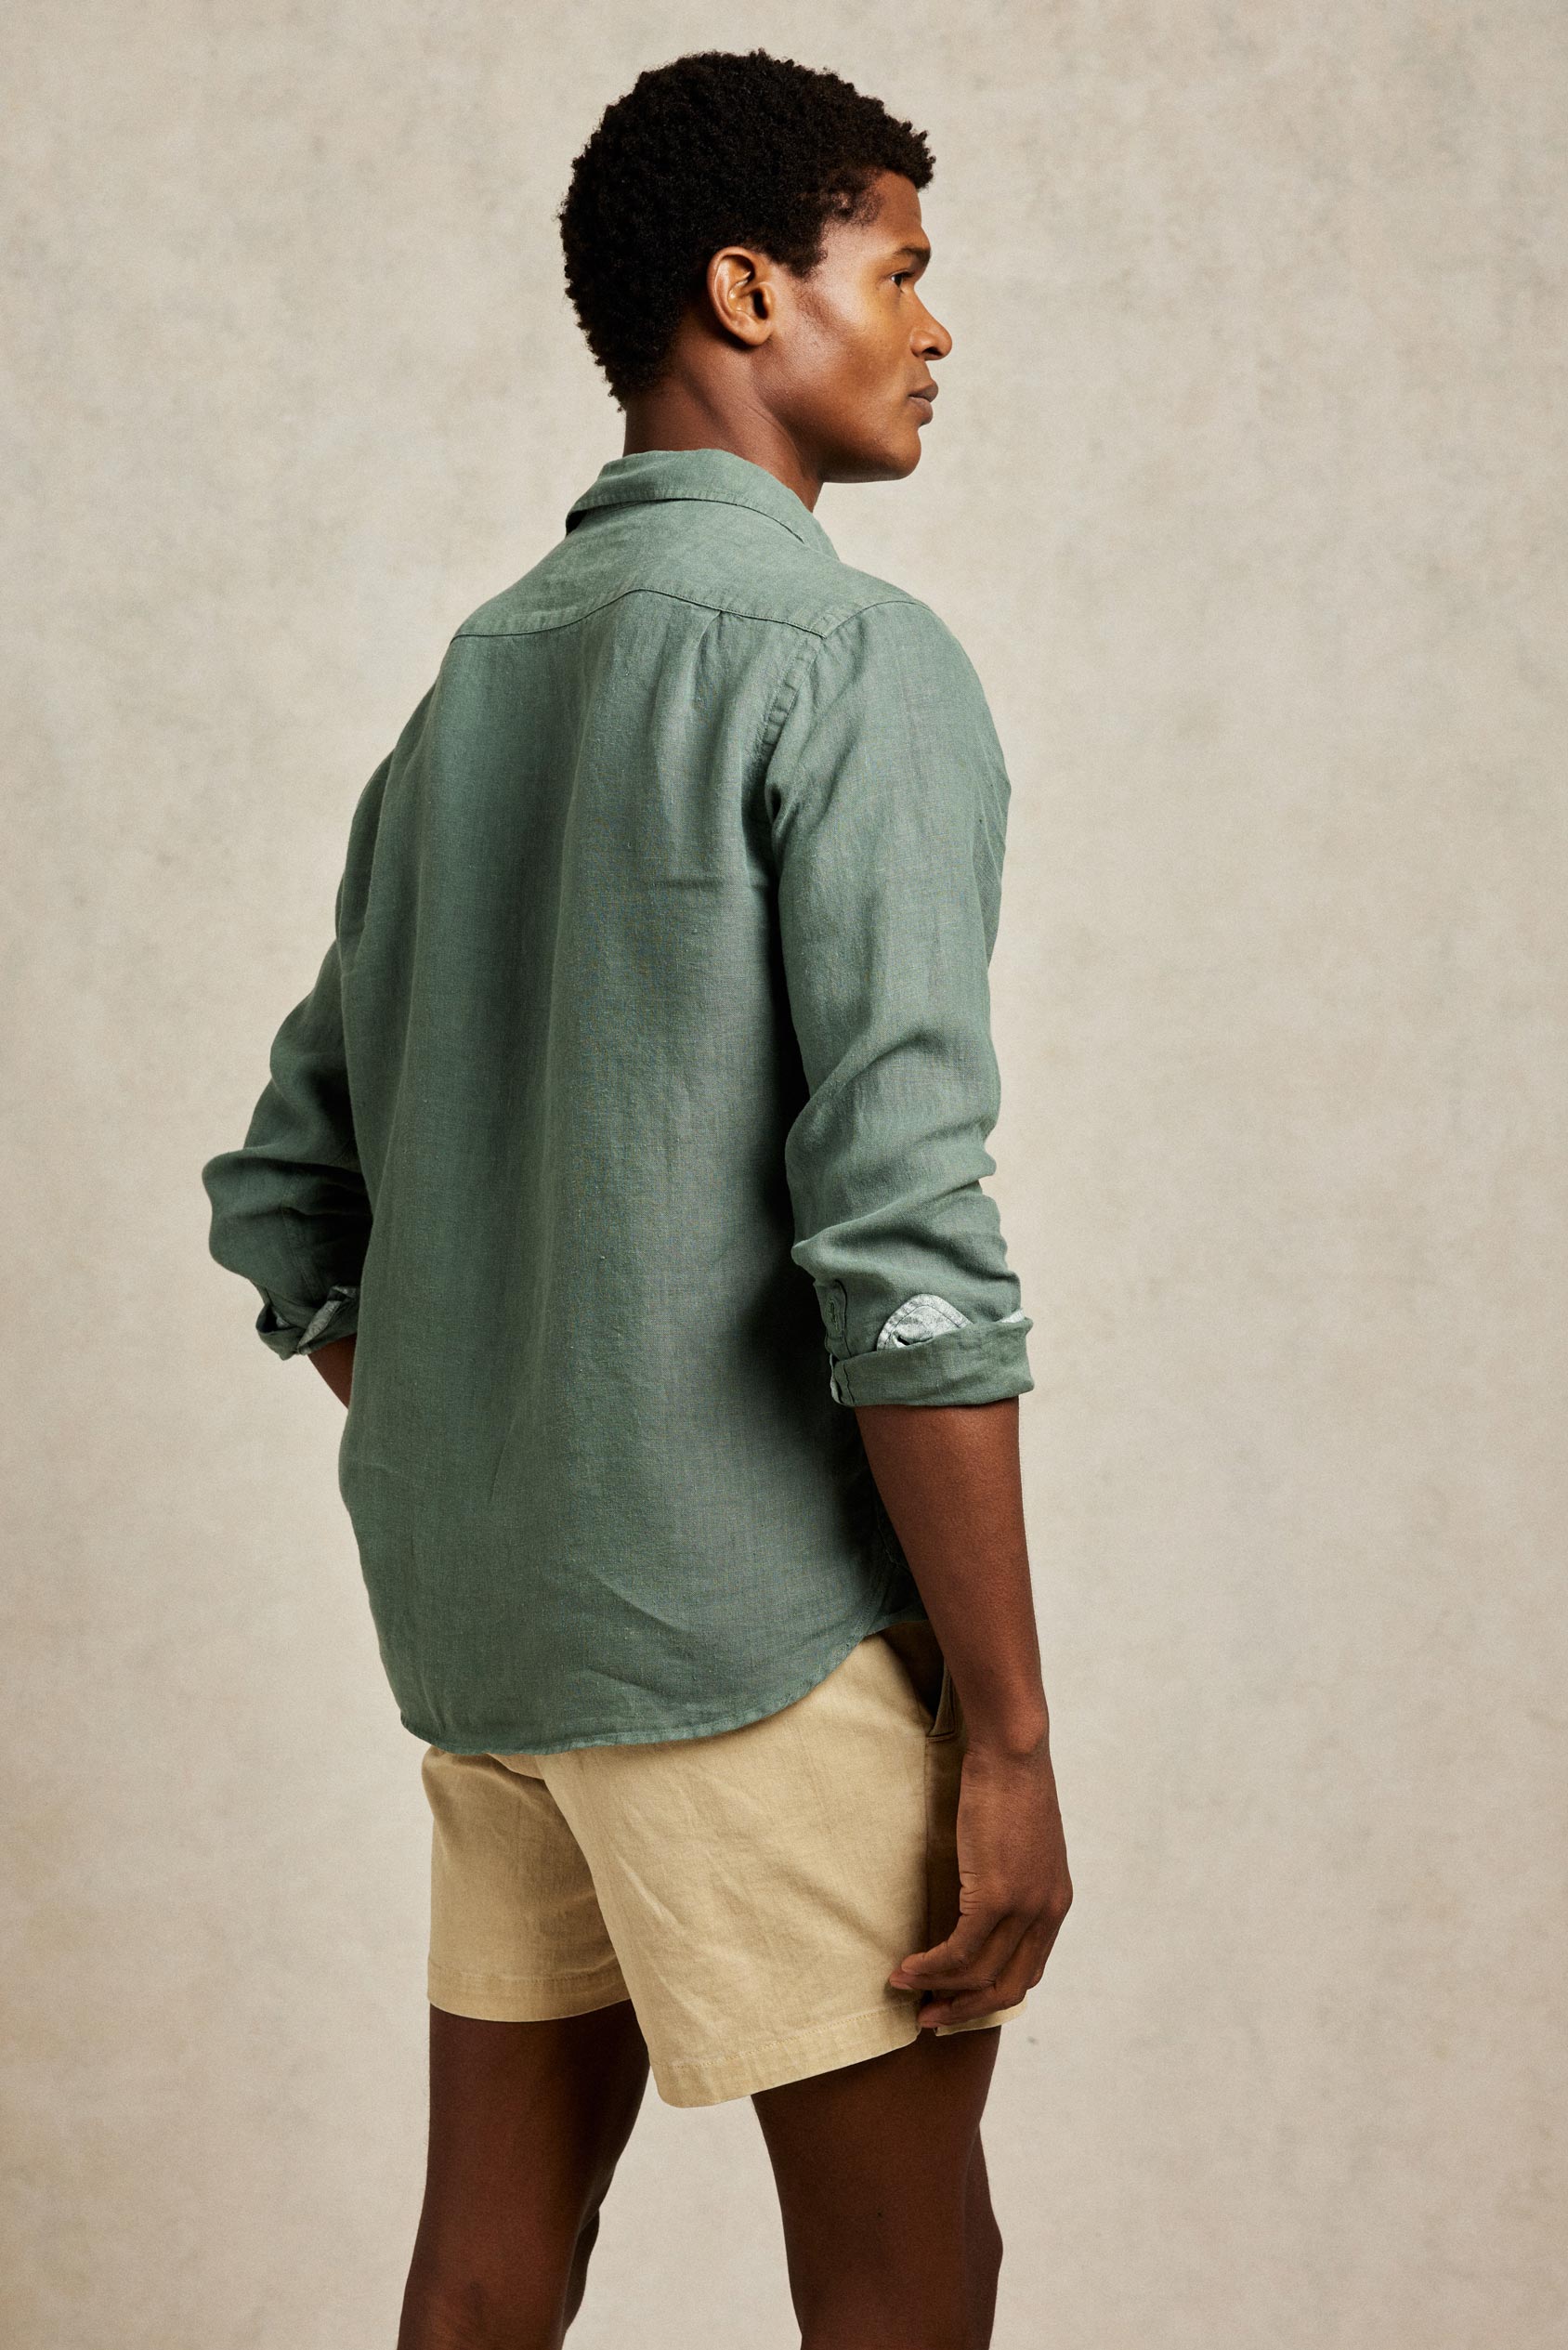 Linen garment dyed khaki men’s green shirt with classic collar. 100% Linen. Cut from soft linen to an immaculate fit with a classic collar. Casual wear. Made in Portugal. Machine wash. Size S, M, L, XL, XXL.